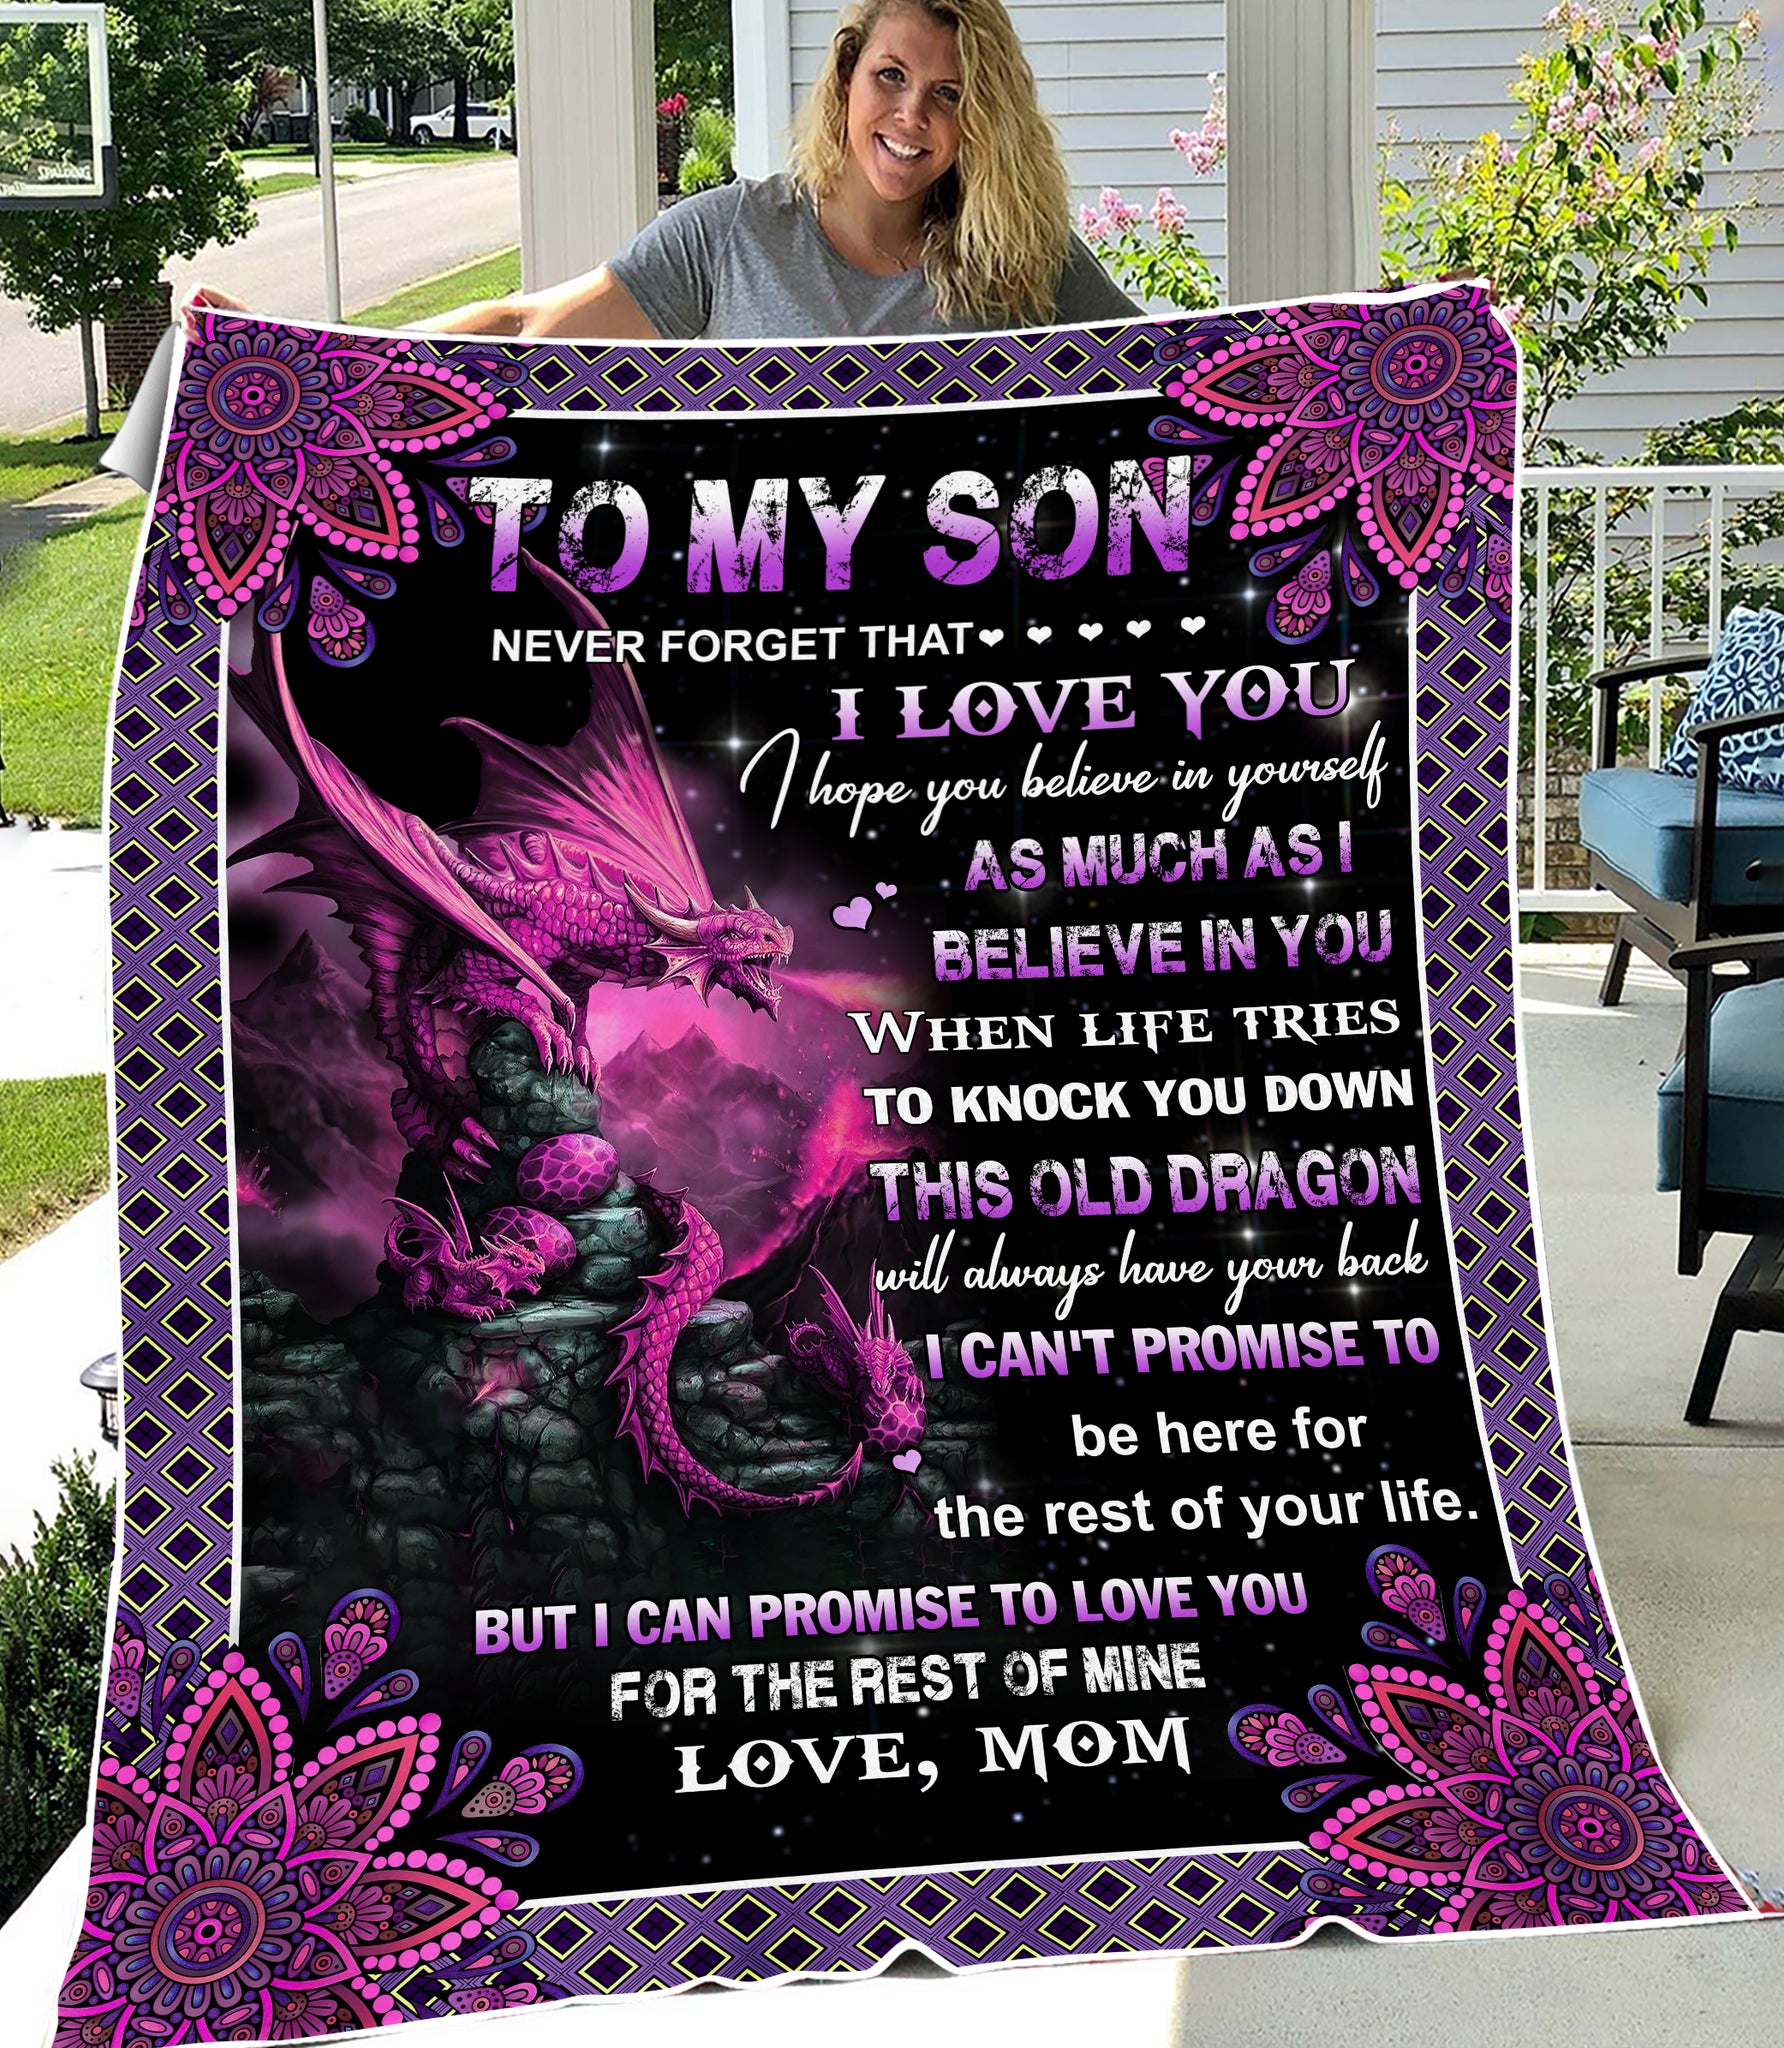 Skitongifts Blanket For Sofa Throws, Bed Throws Blanket-To My Son Never Forget That i Love You i Believe in This Old Dragon i can Promise to Love You-VT1305